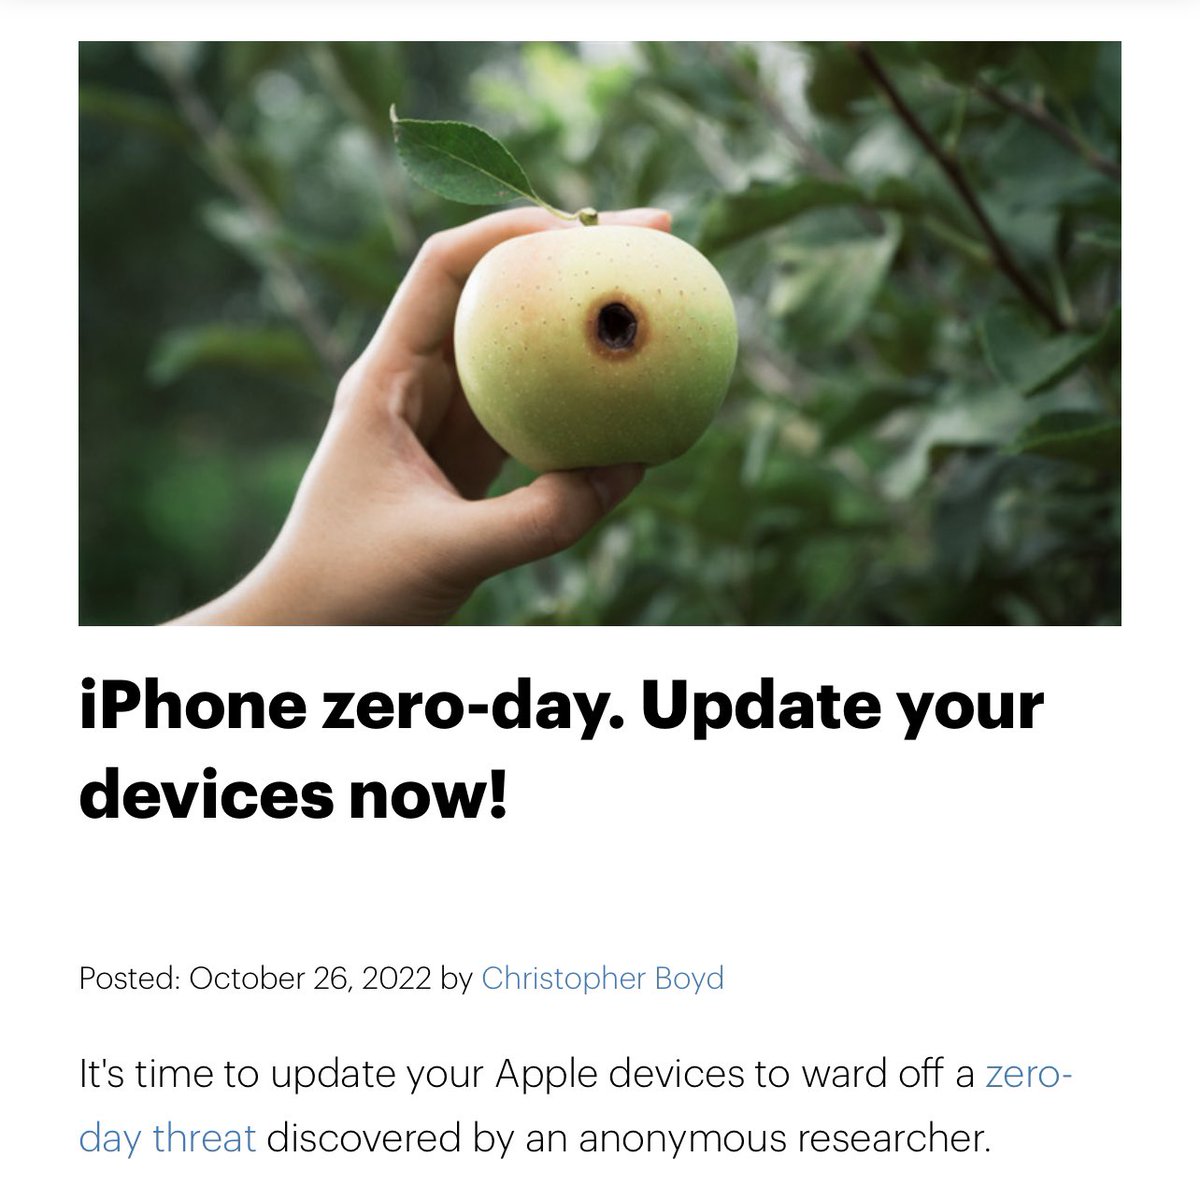 ⚠️ URGENT Apple iOS Zero-Day being used in the wild. Please update all iOS devices right away. The nature of this Zero-Day seems to allow apps to execute arbitrary code with kernel level permissions. (Highest permission level) Please share for awareness! Stay safe Fam🔒